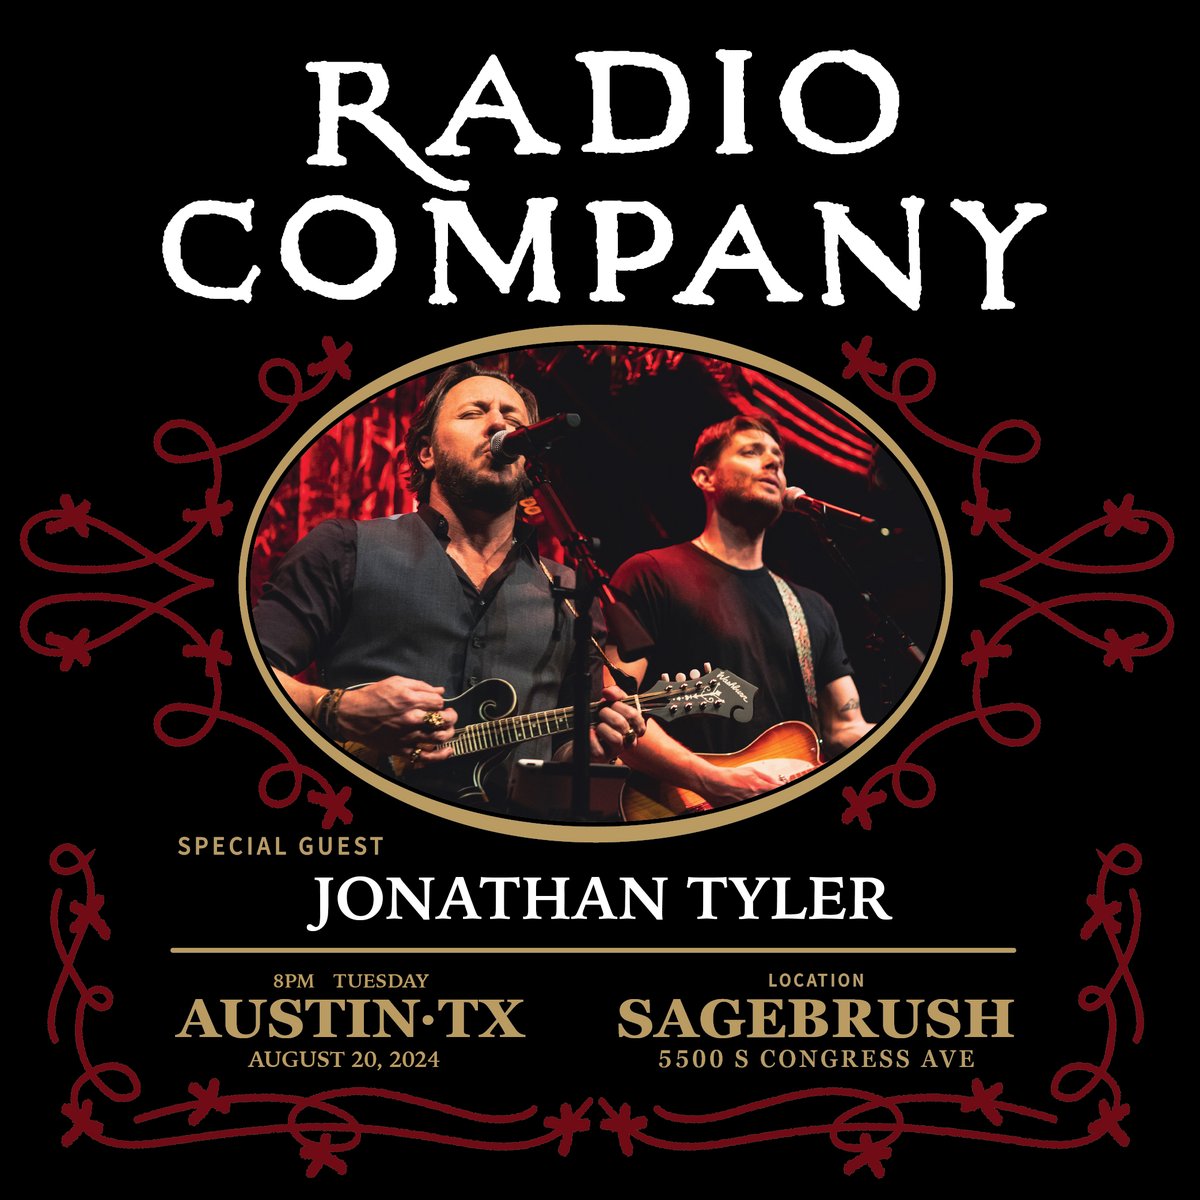 2nd Show Added! Radio Company Live in Austin at the Sagebrush August 20th with @Jonathan_Tyler tinyurl.com/RCATXTIX